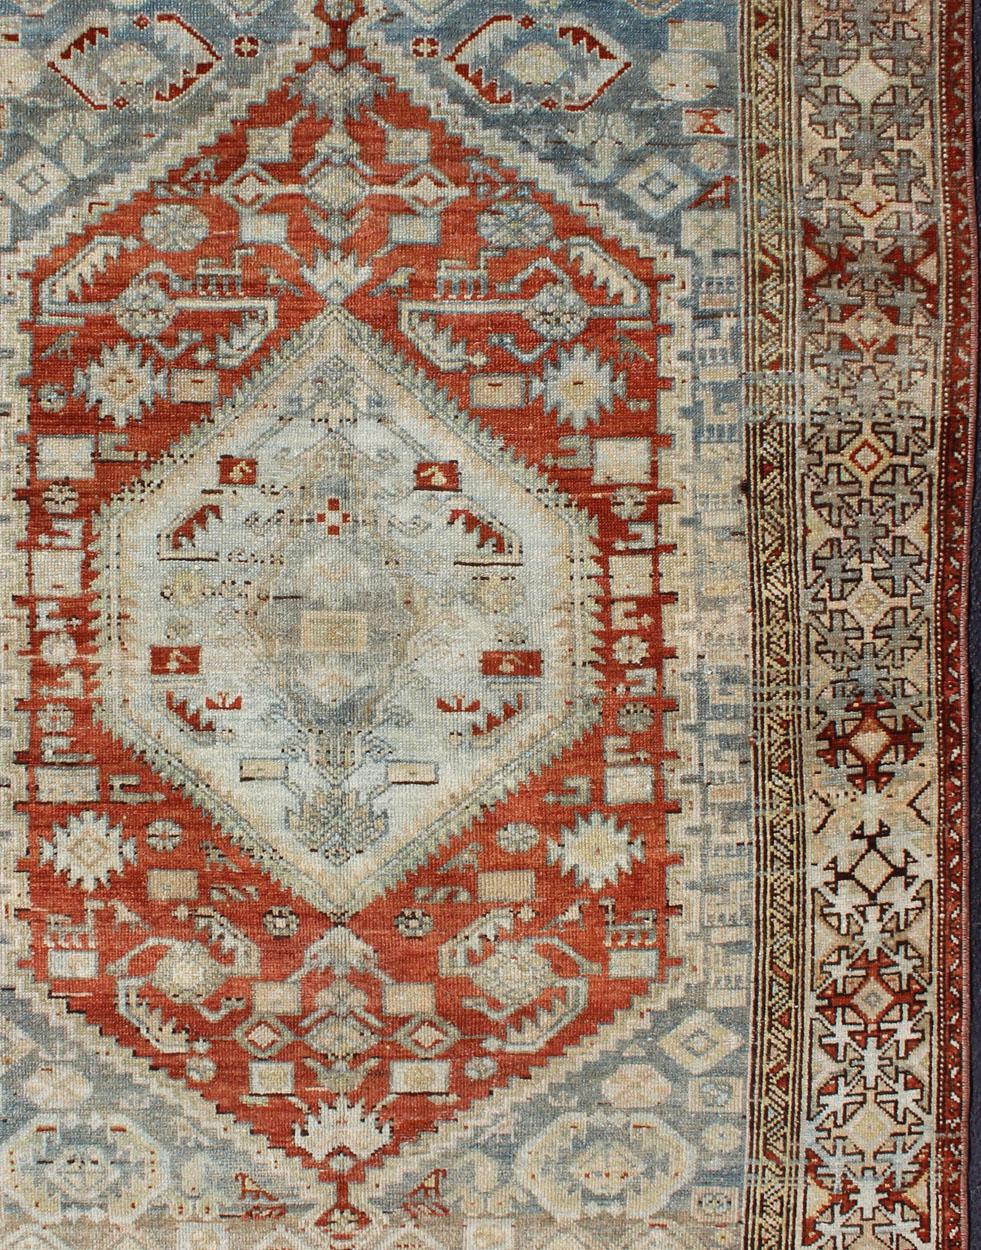 Antique Persian rug in shades of orange-red, light blue gray, and taupe, rug SUS-1908-2, country of origin / type: Iran / Malayer, circa 1910.

This traditional Persian Malayer carpet from the early 20th century is characterized by its orange-red